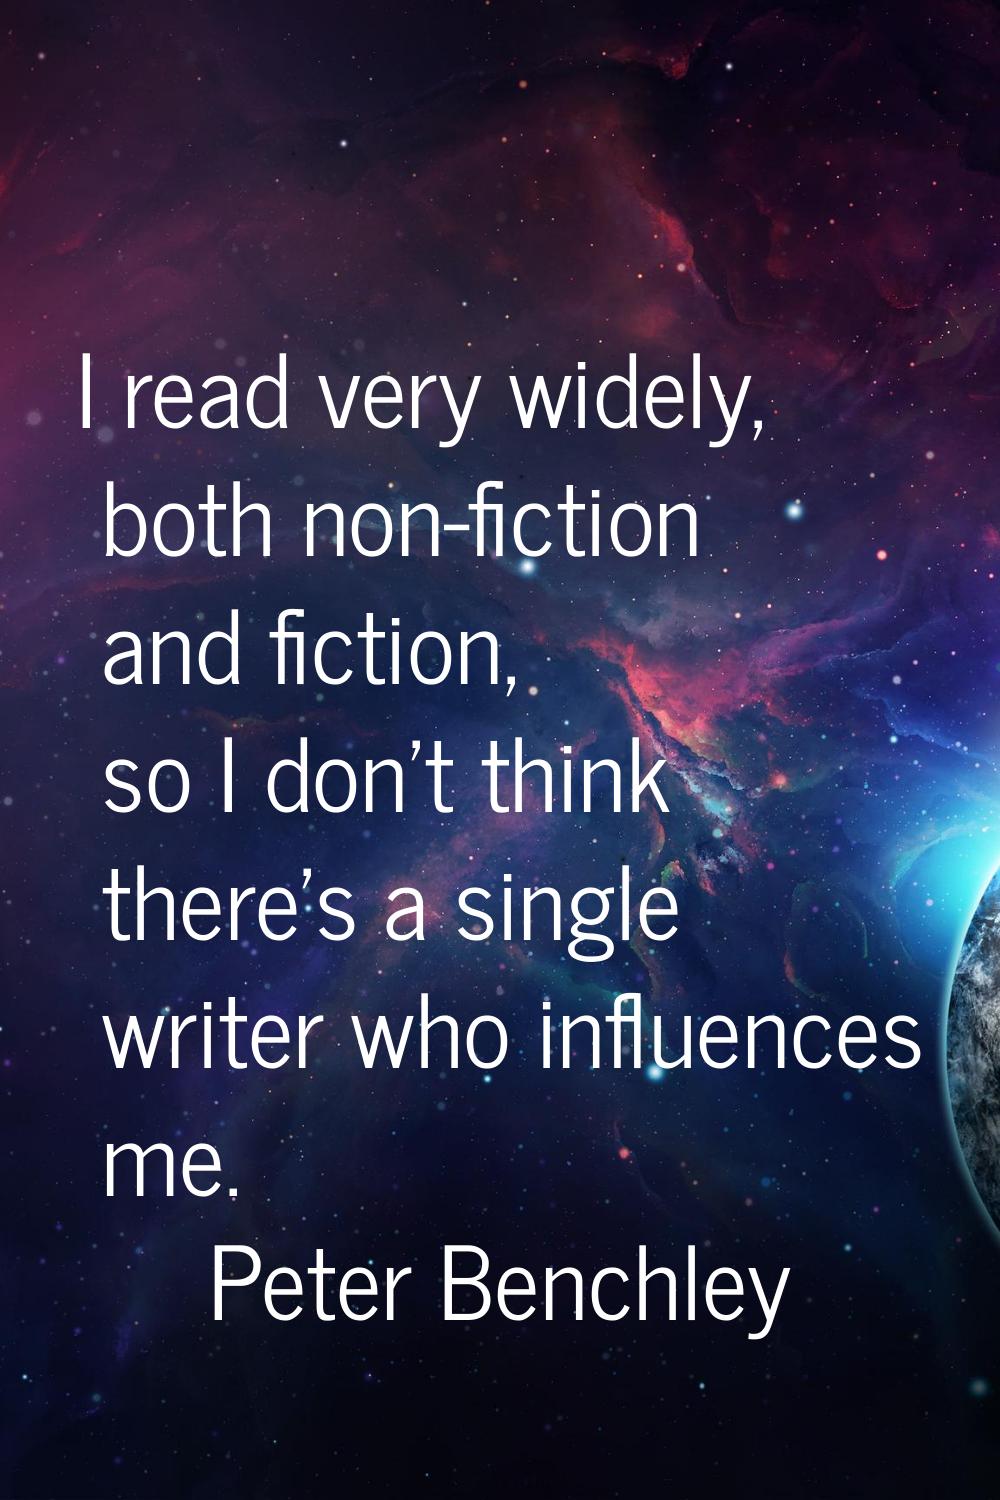 I read very widely, both non-fiction and fiction, so I don't think there's a single writer who infl